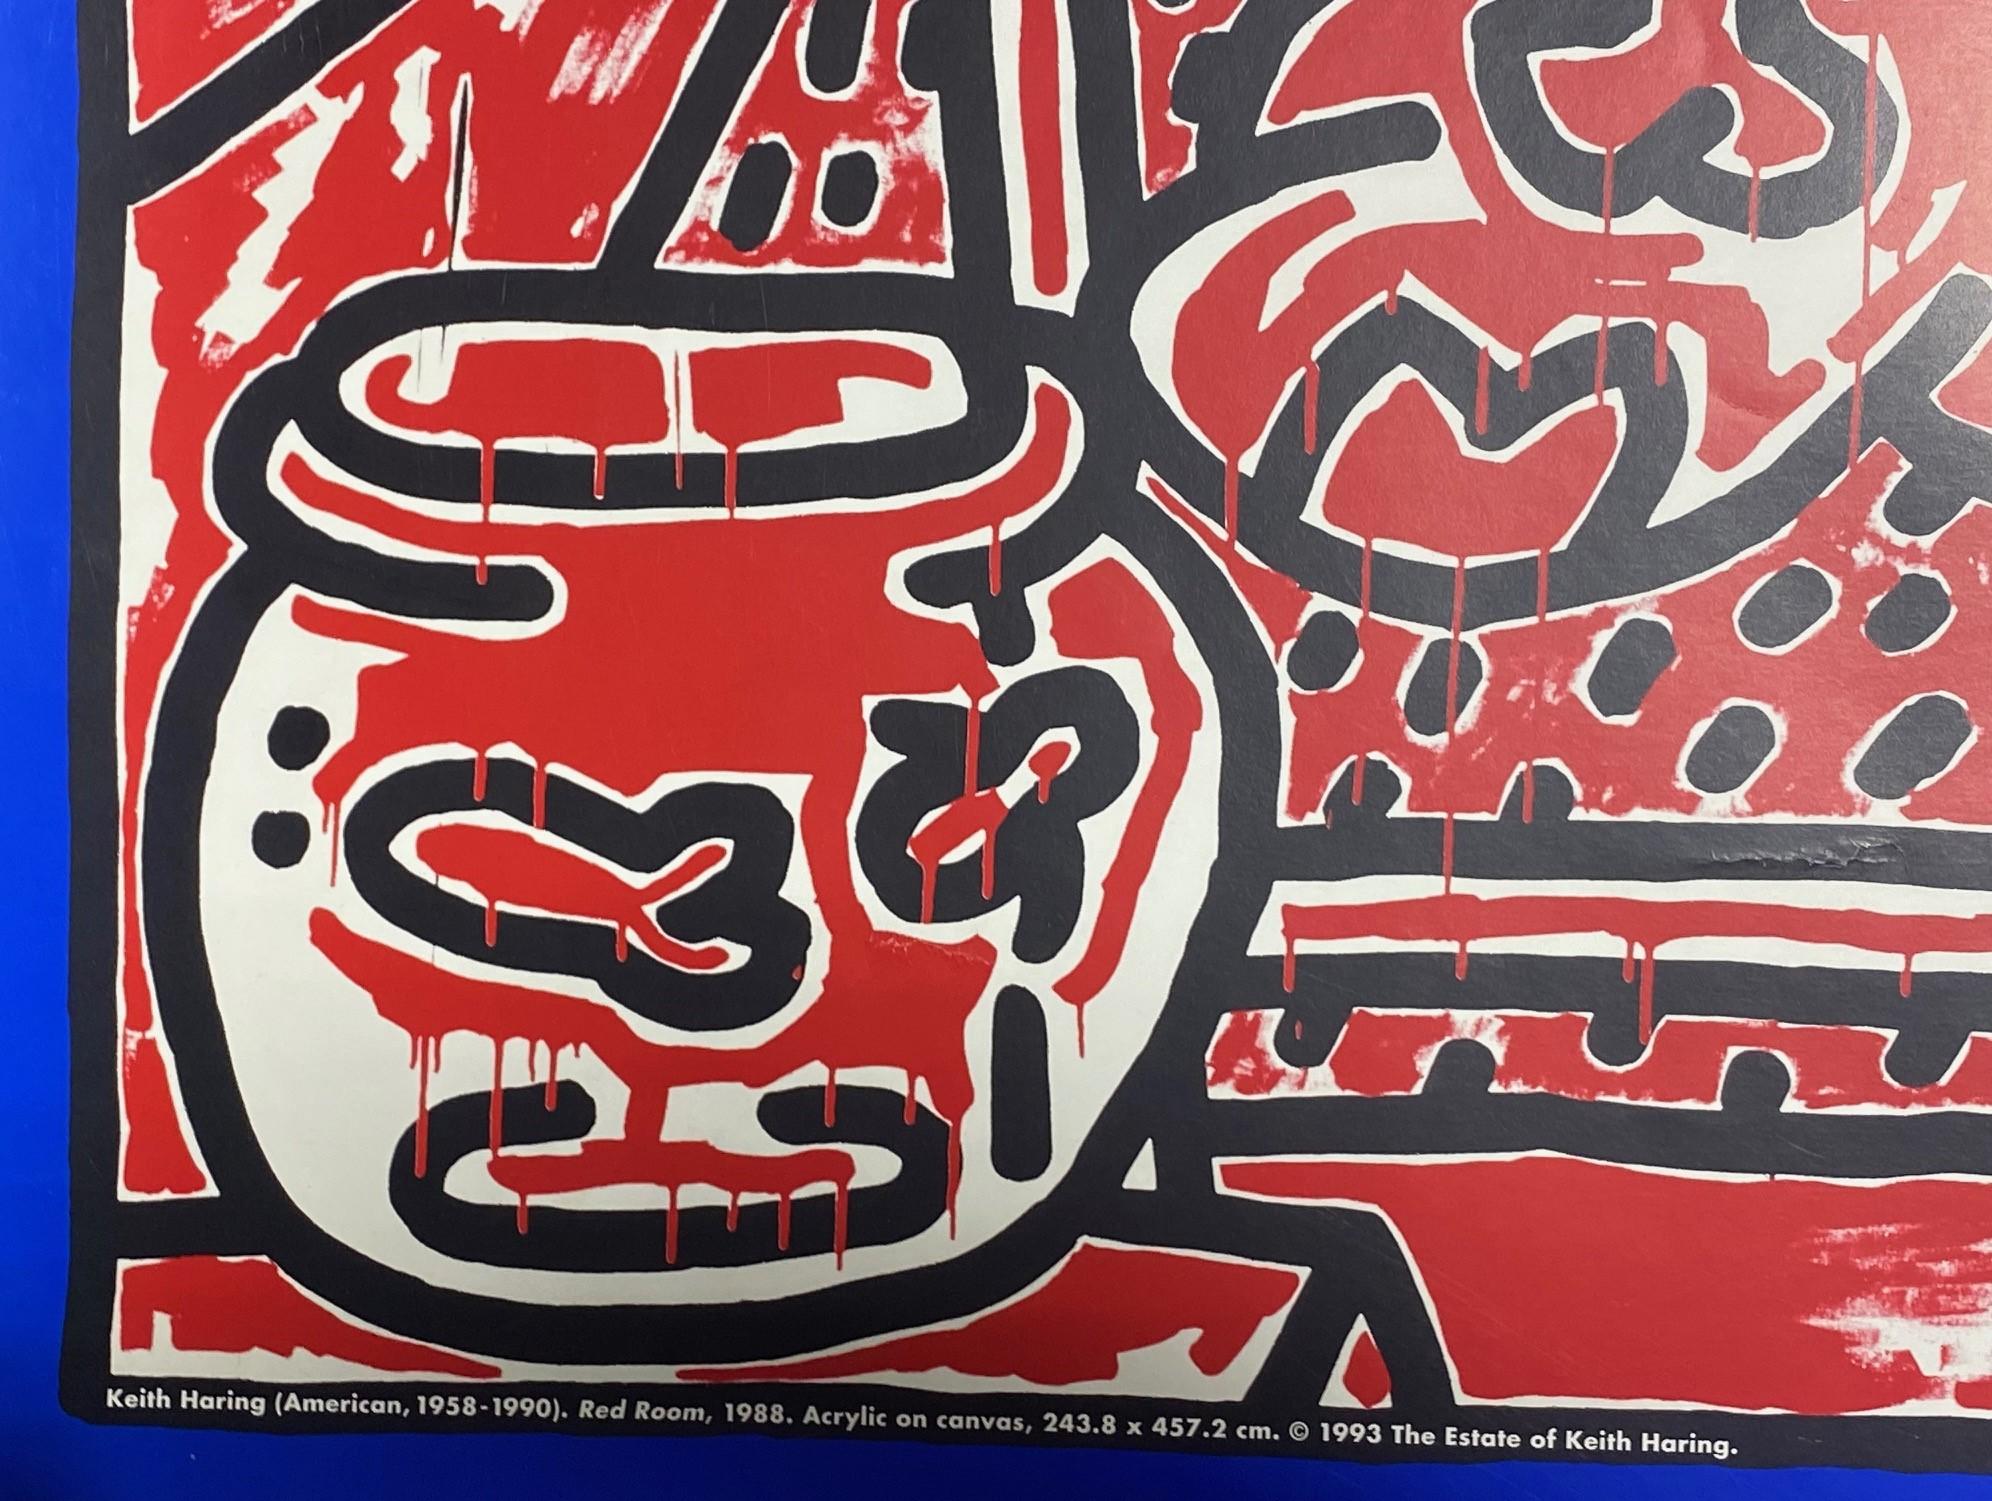 Keith Haring Vintage NYC Pop Shop te Neues Art Lithograph Poster Red Room, 1993 For Sale 6